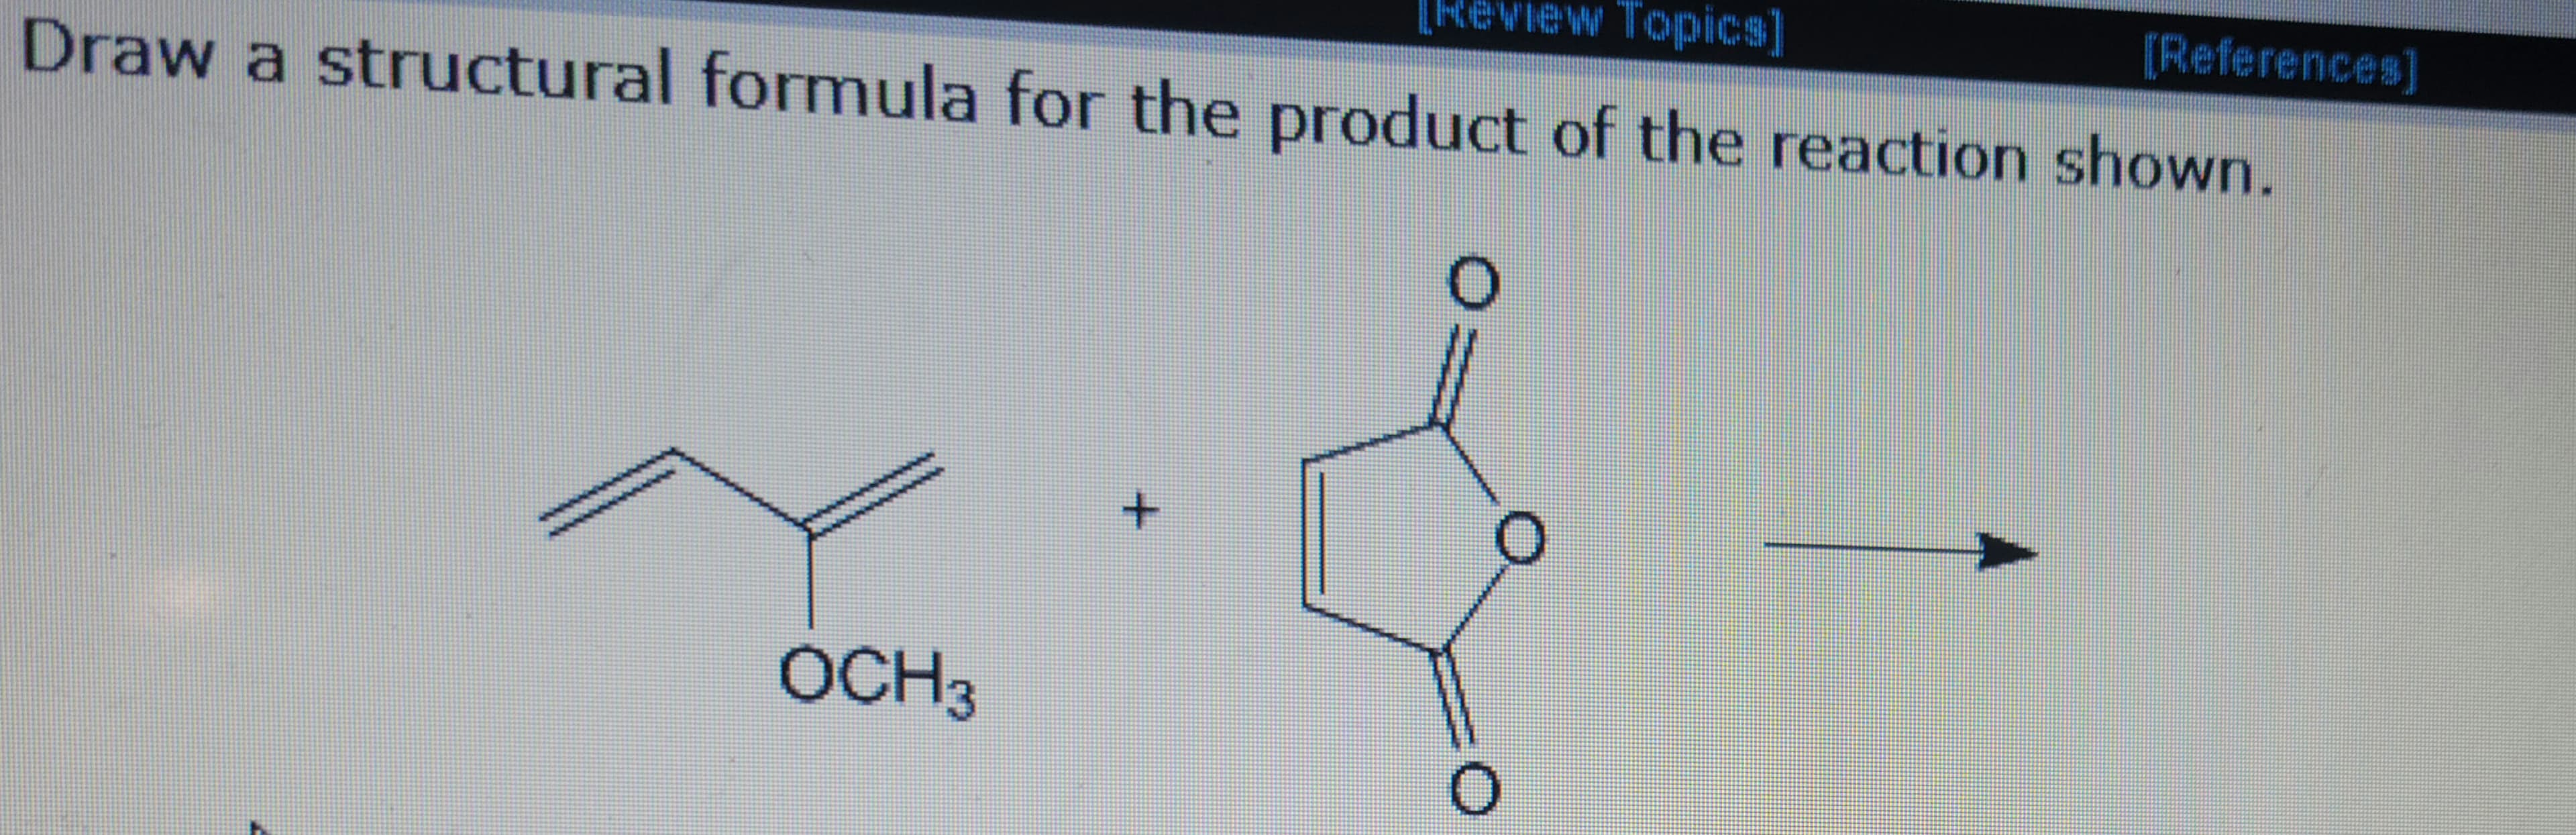 [Review Topics]
Draw a structural formula for the product of the reaction shown.
OCH3
x
O
[References]